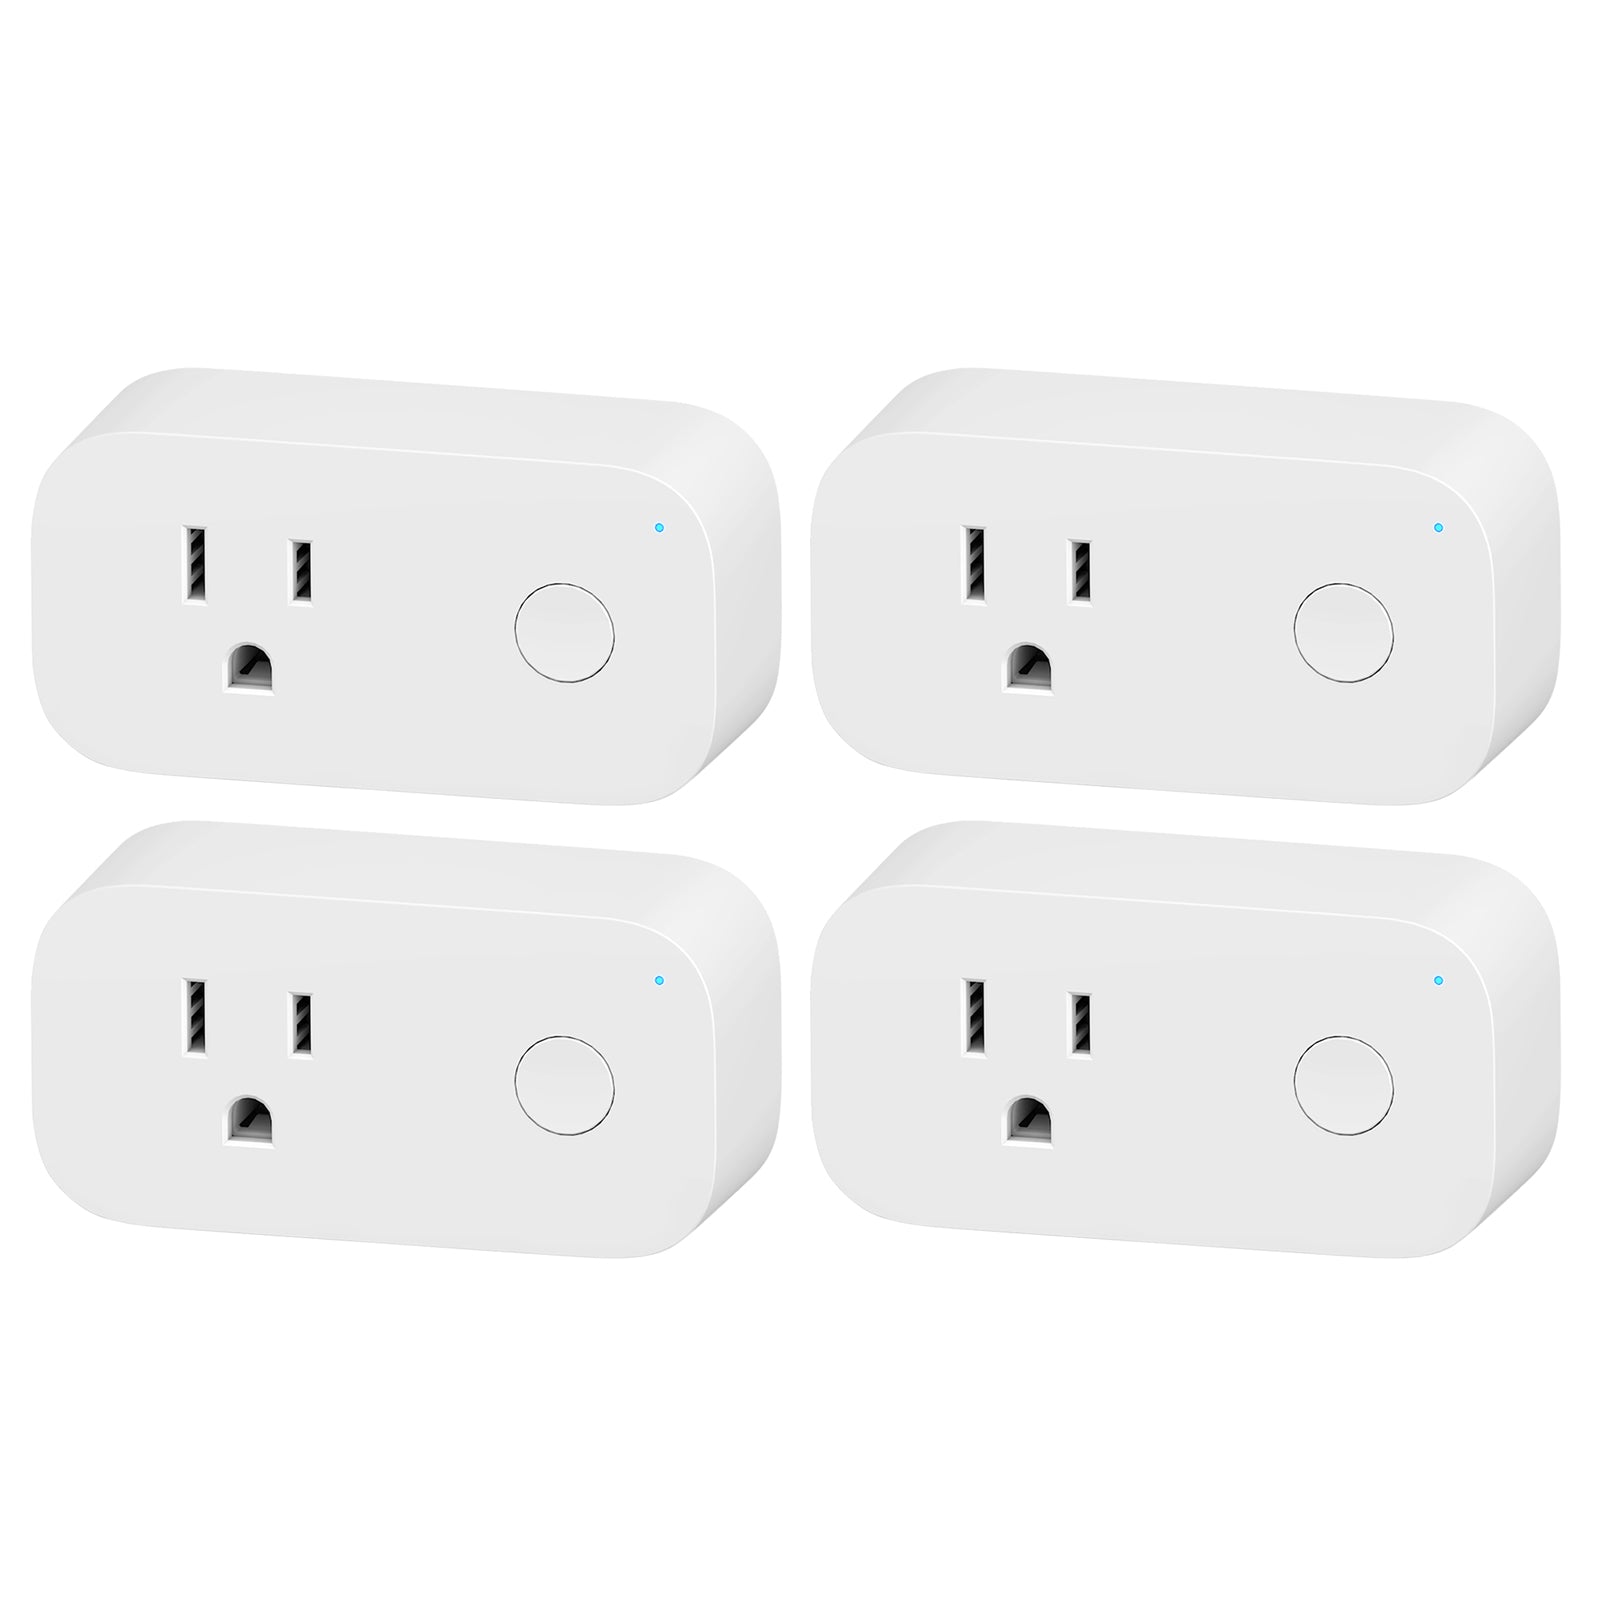 Outdoor Smart WiFi Dimmer Plug APP Remote Control and Google Assistant - BN- LINK